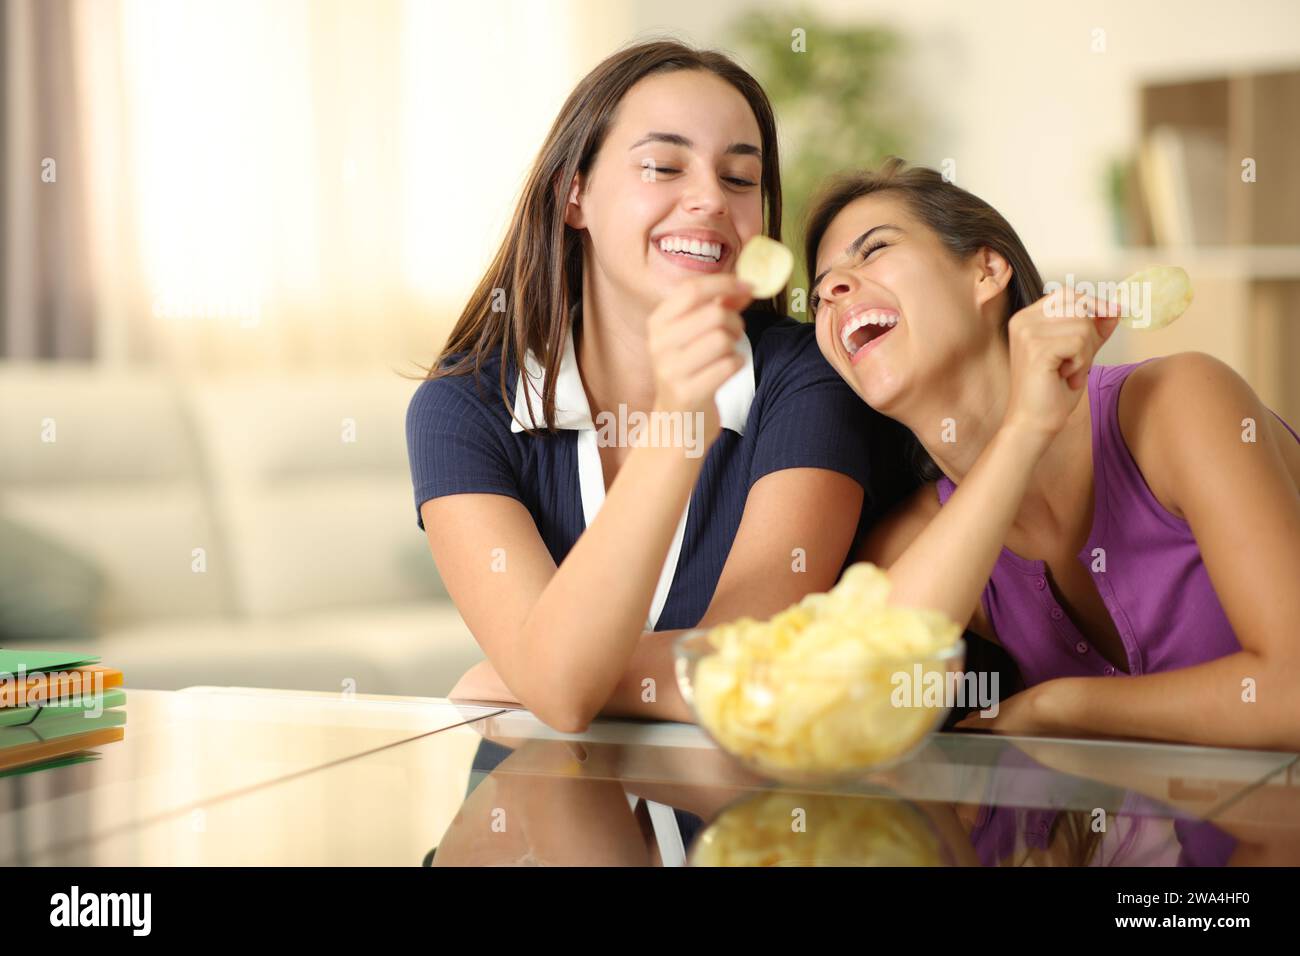 Two funny roommates laughing and eating potato chips at home Stock Photo